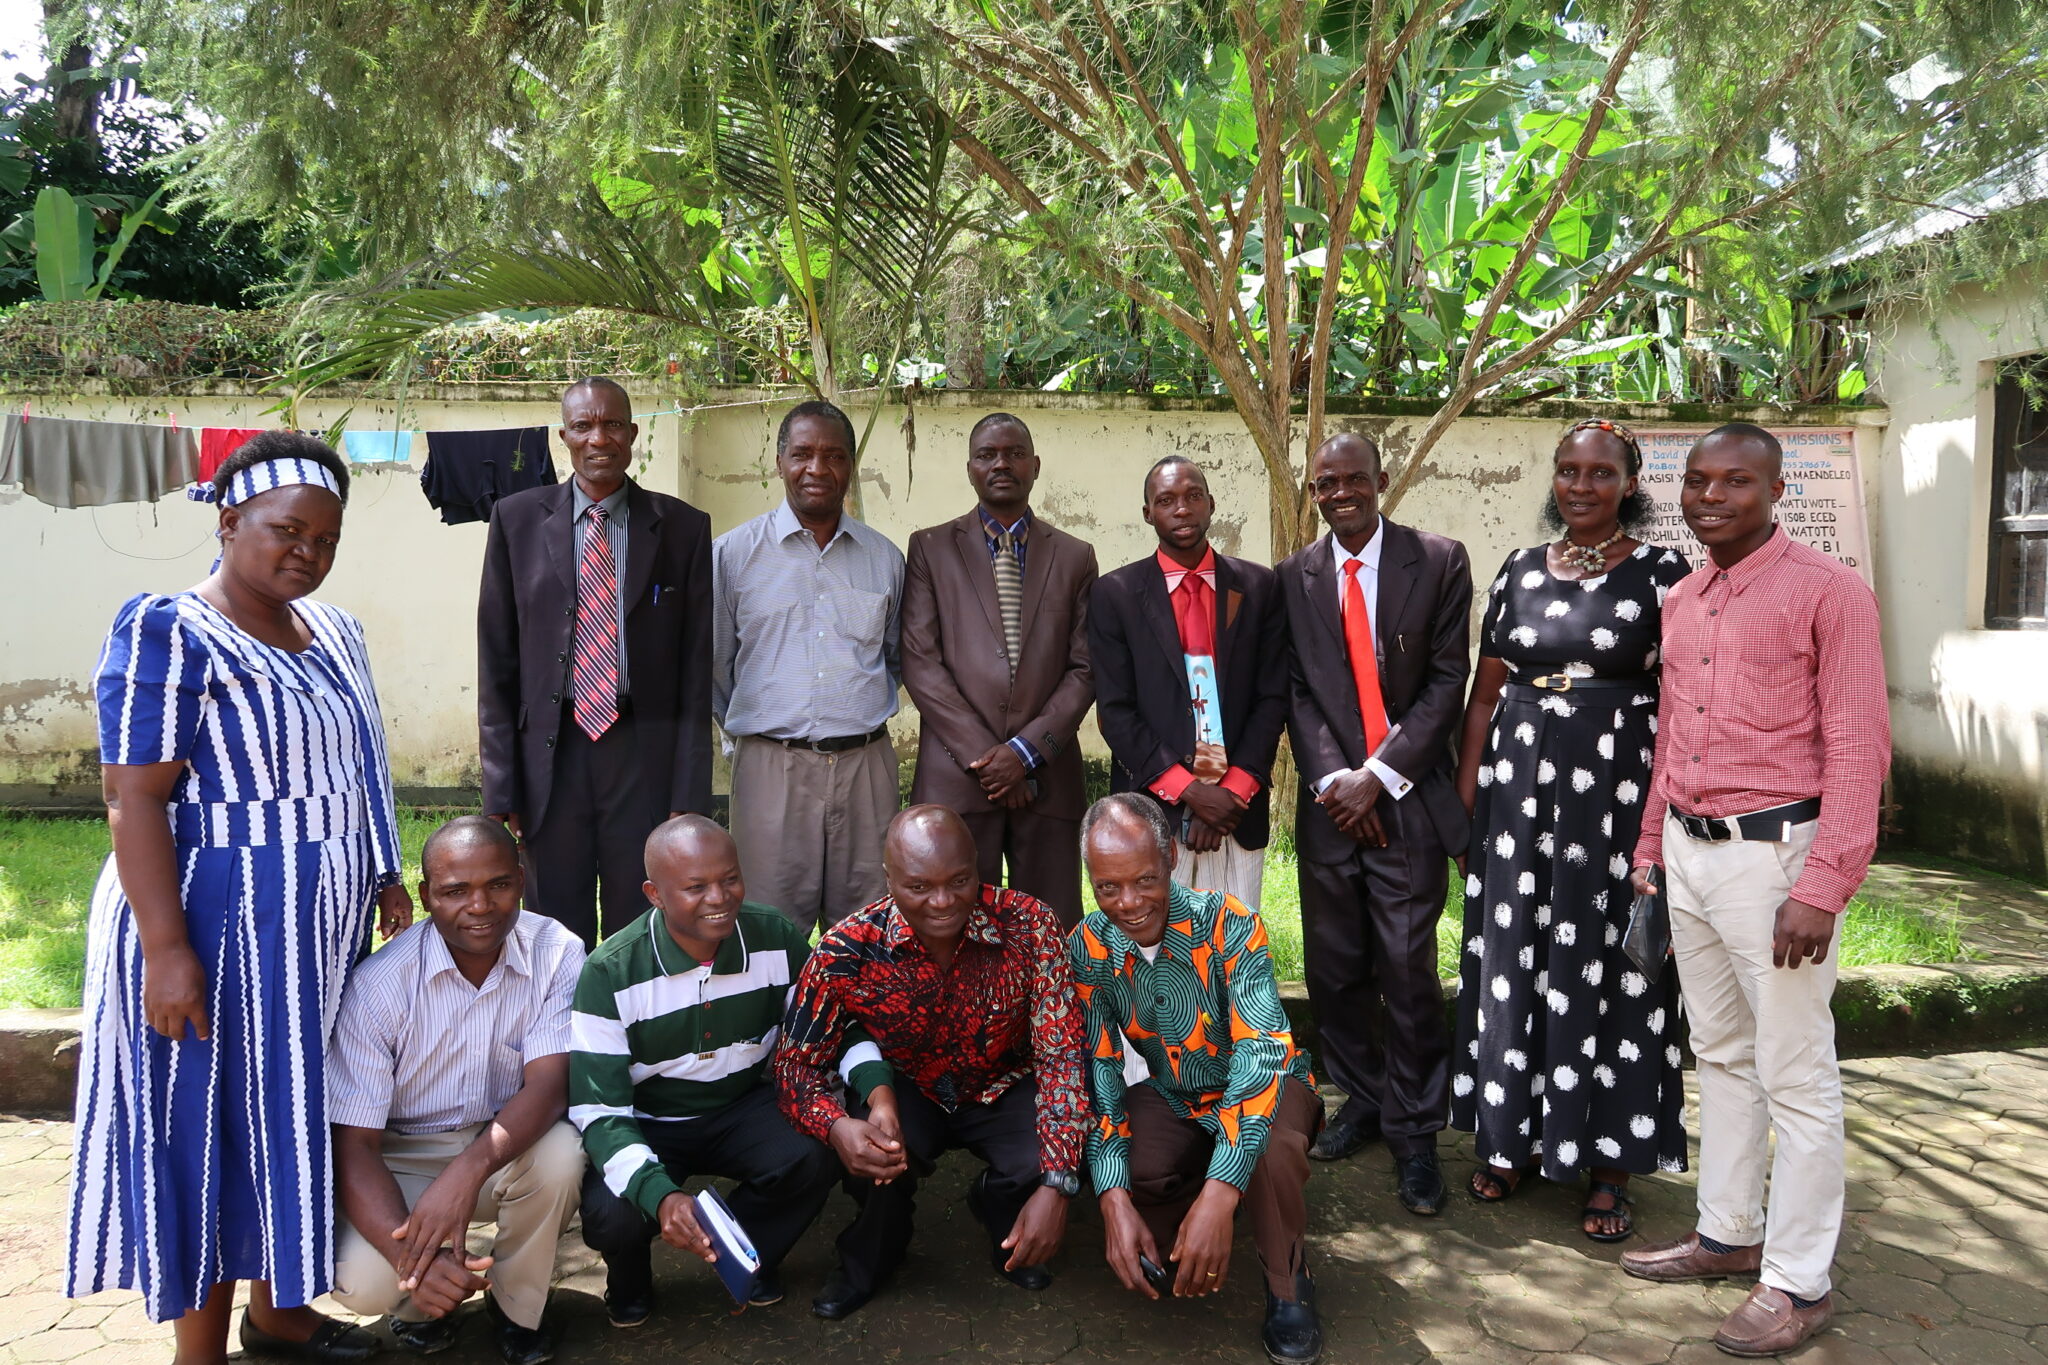 A group of Crossroads mentors in Tanzania